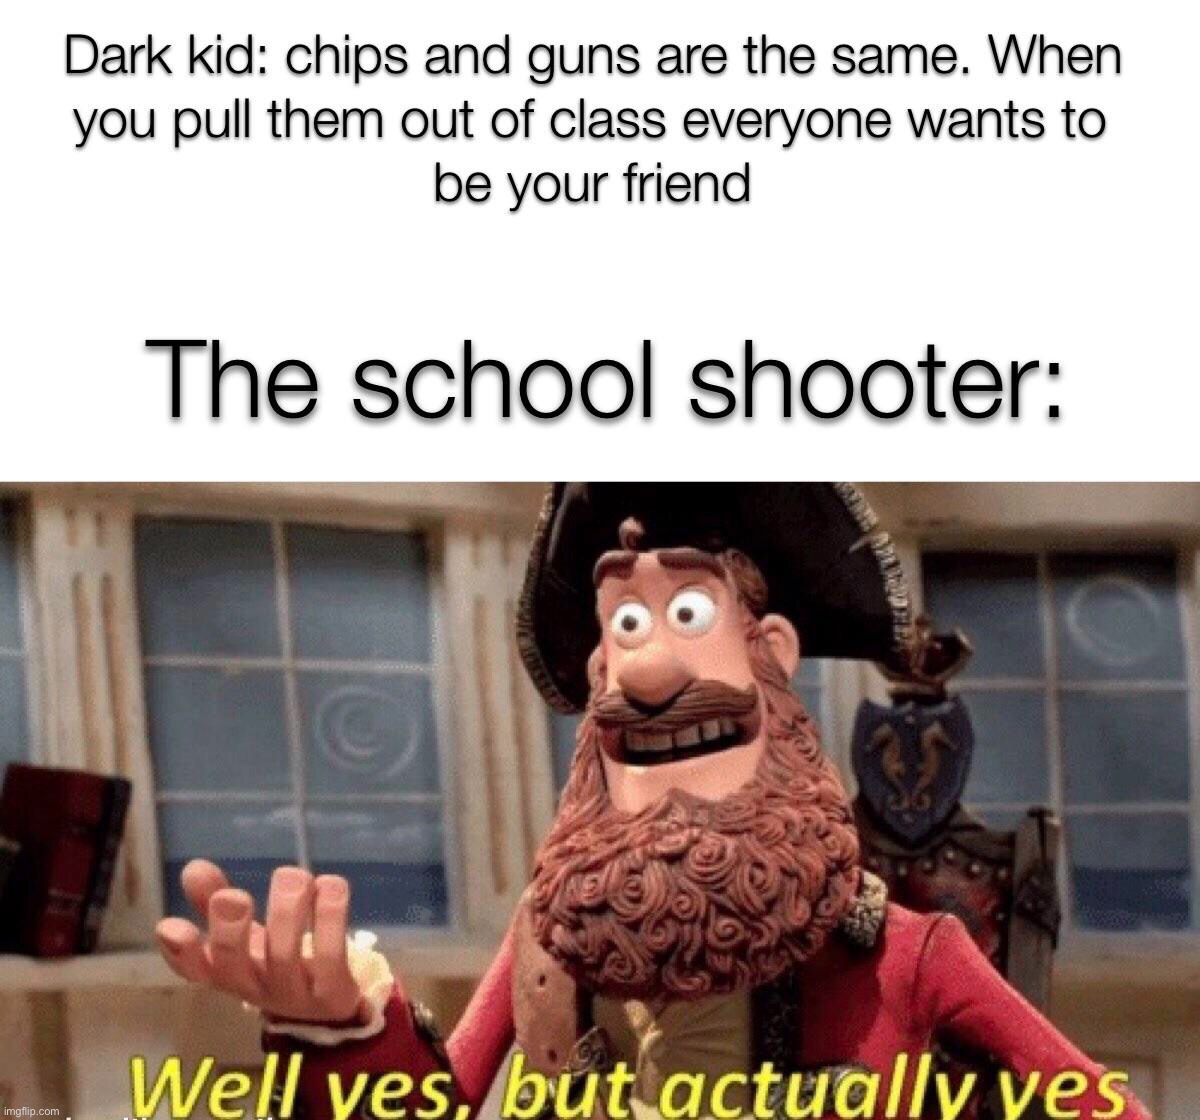 Well yes, but actually, yes | image tagged in memes,funny,school,school shooter,lmao,oop | made w/ Imgflip meme maker